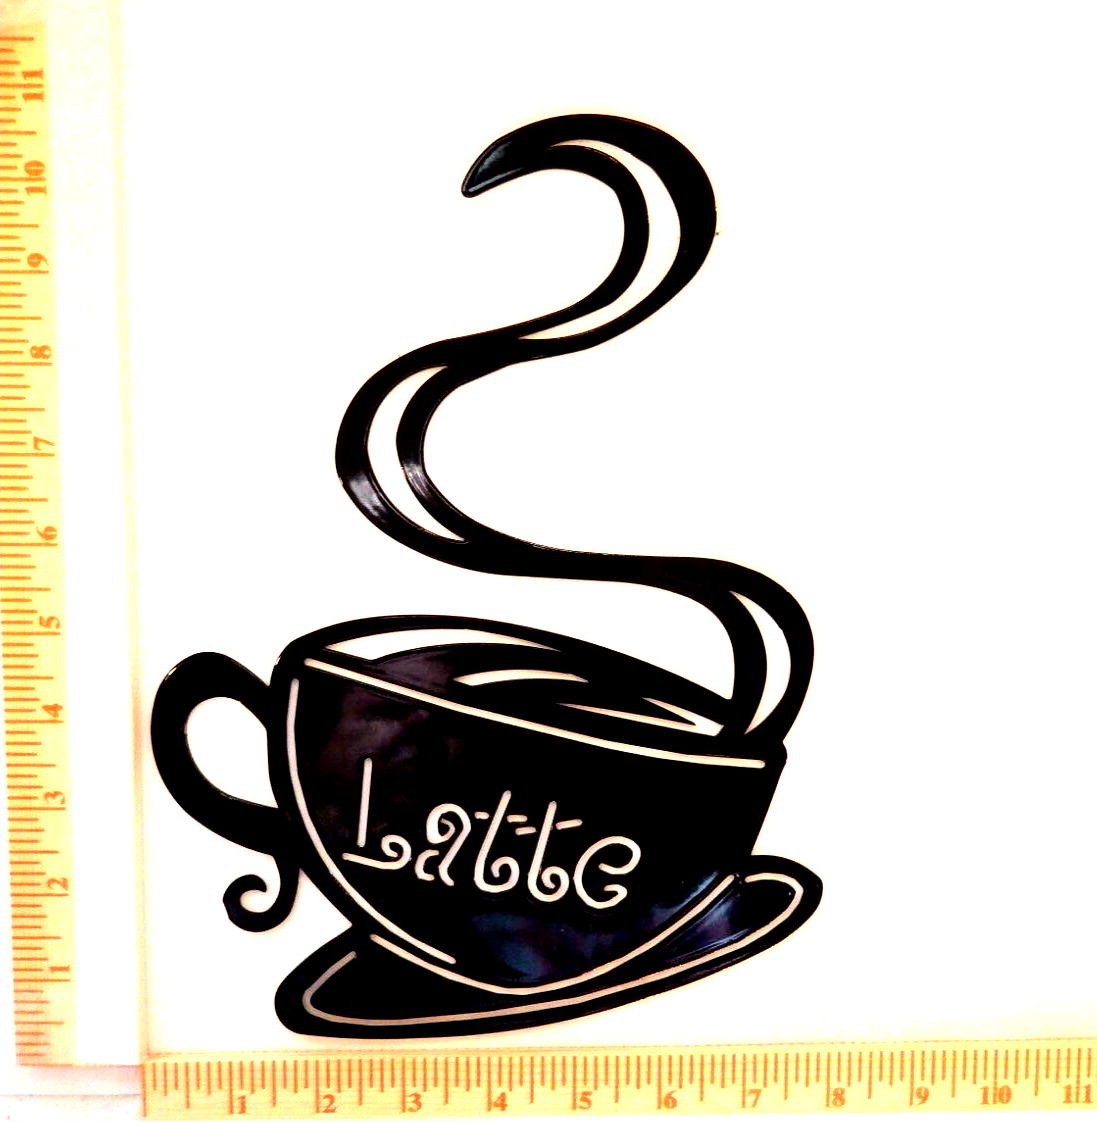 *NEW*  "Latte" 14 gauge Black Metal Sign Wall Decor for Kitchen and Dinning Room